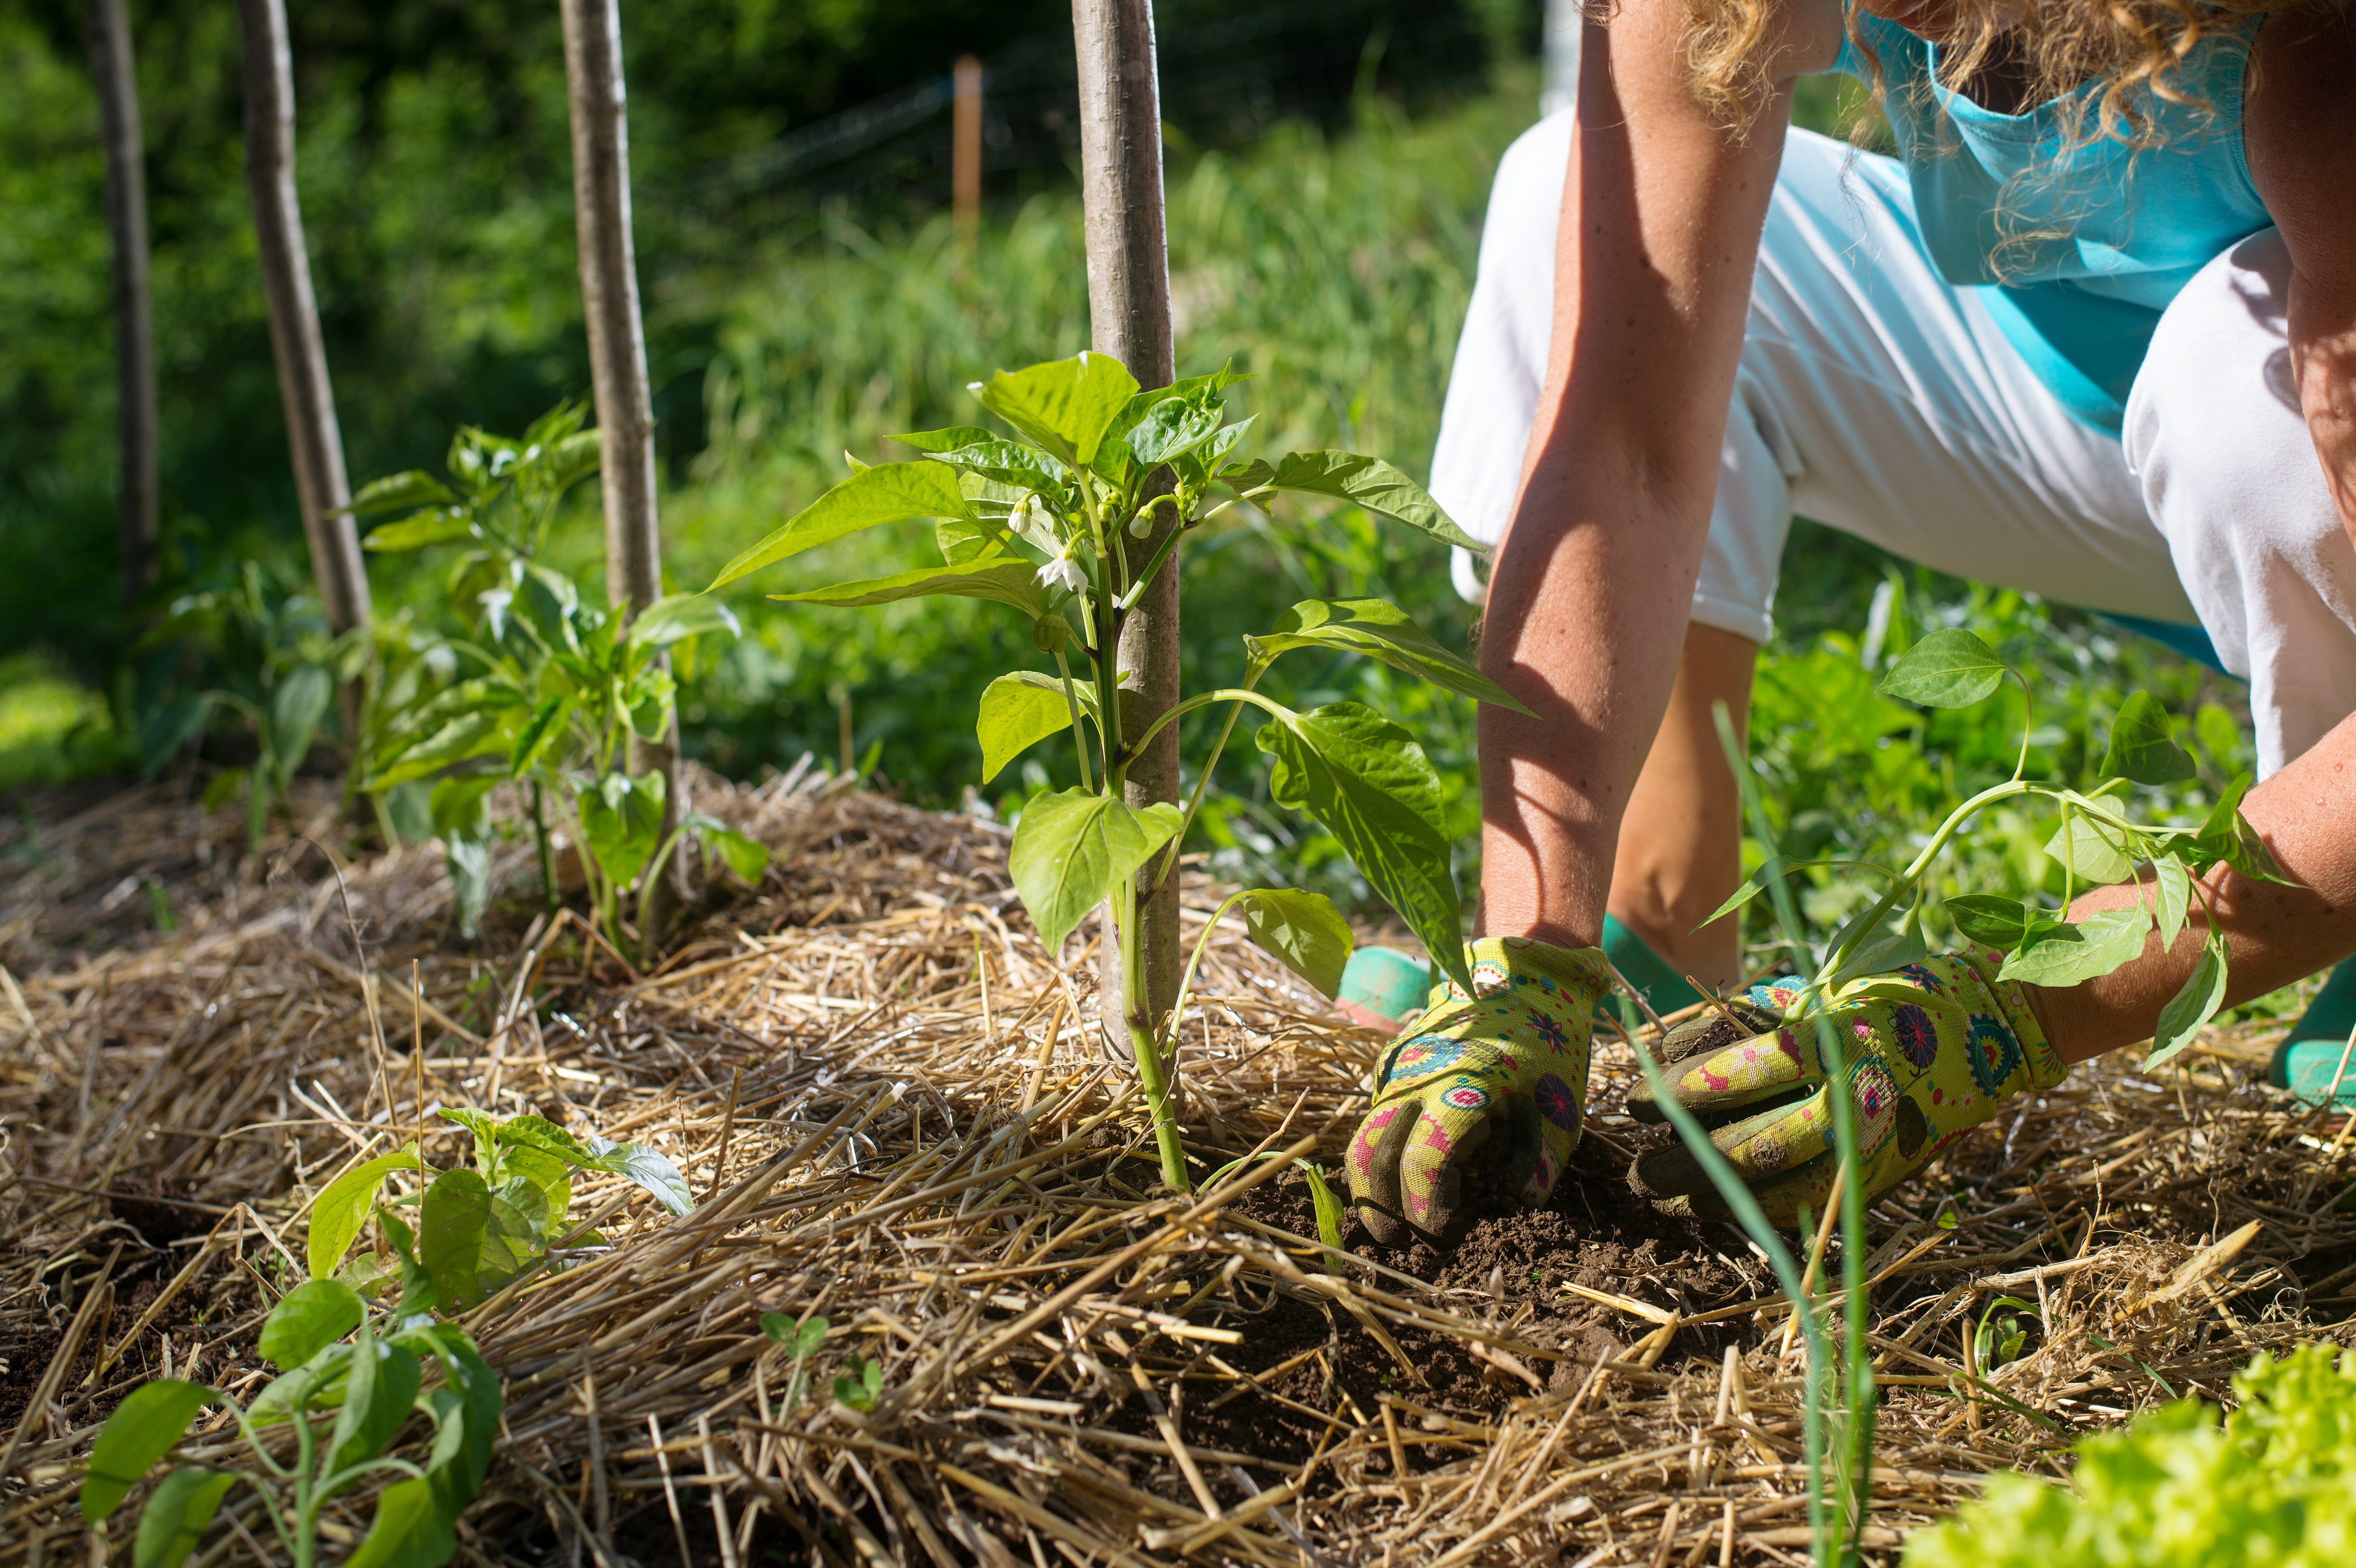 Covering young capsicum plants with straw mulch to protect from drying out quickly ant to control weed in the garden. Planting, using mulch for weed control, water retention.